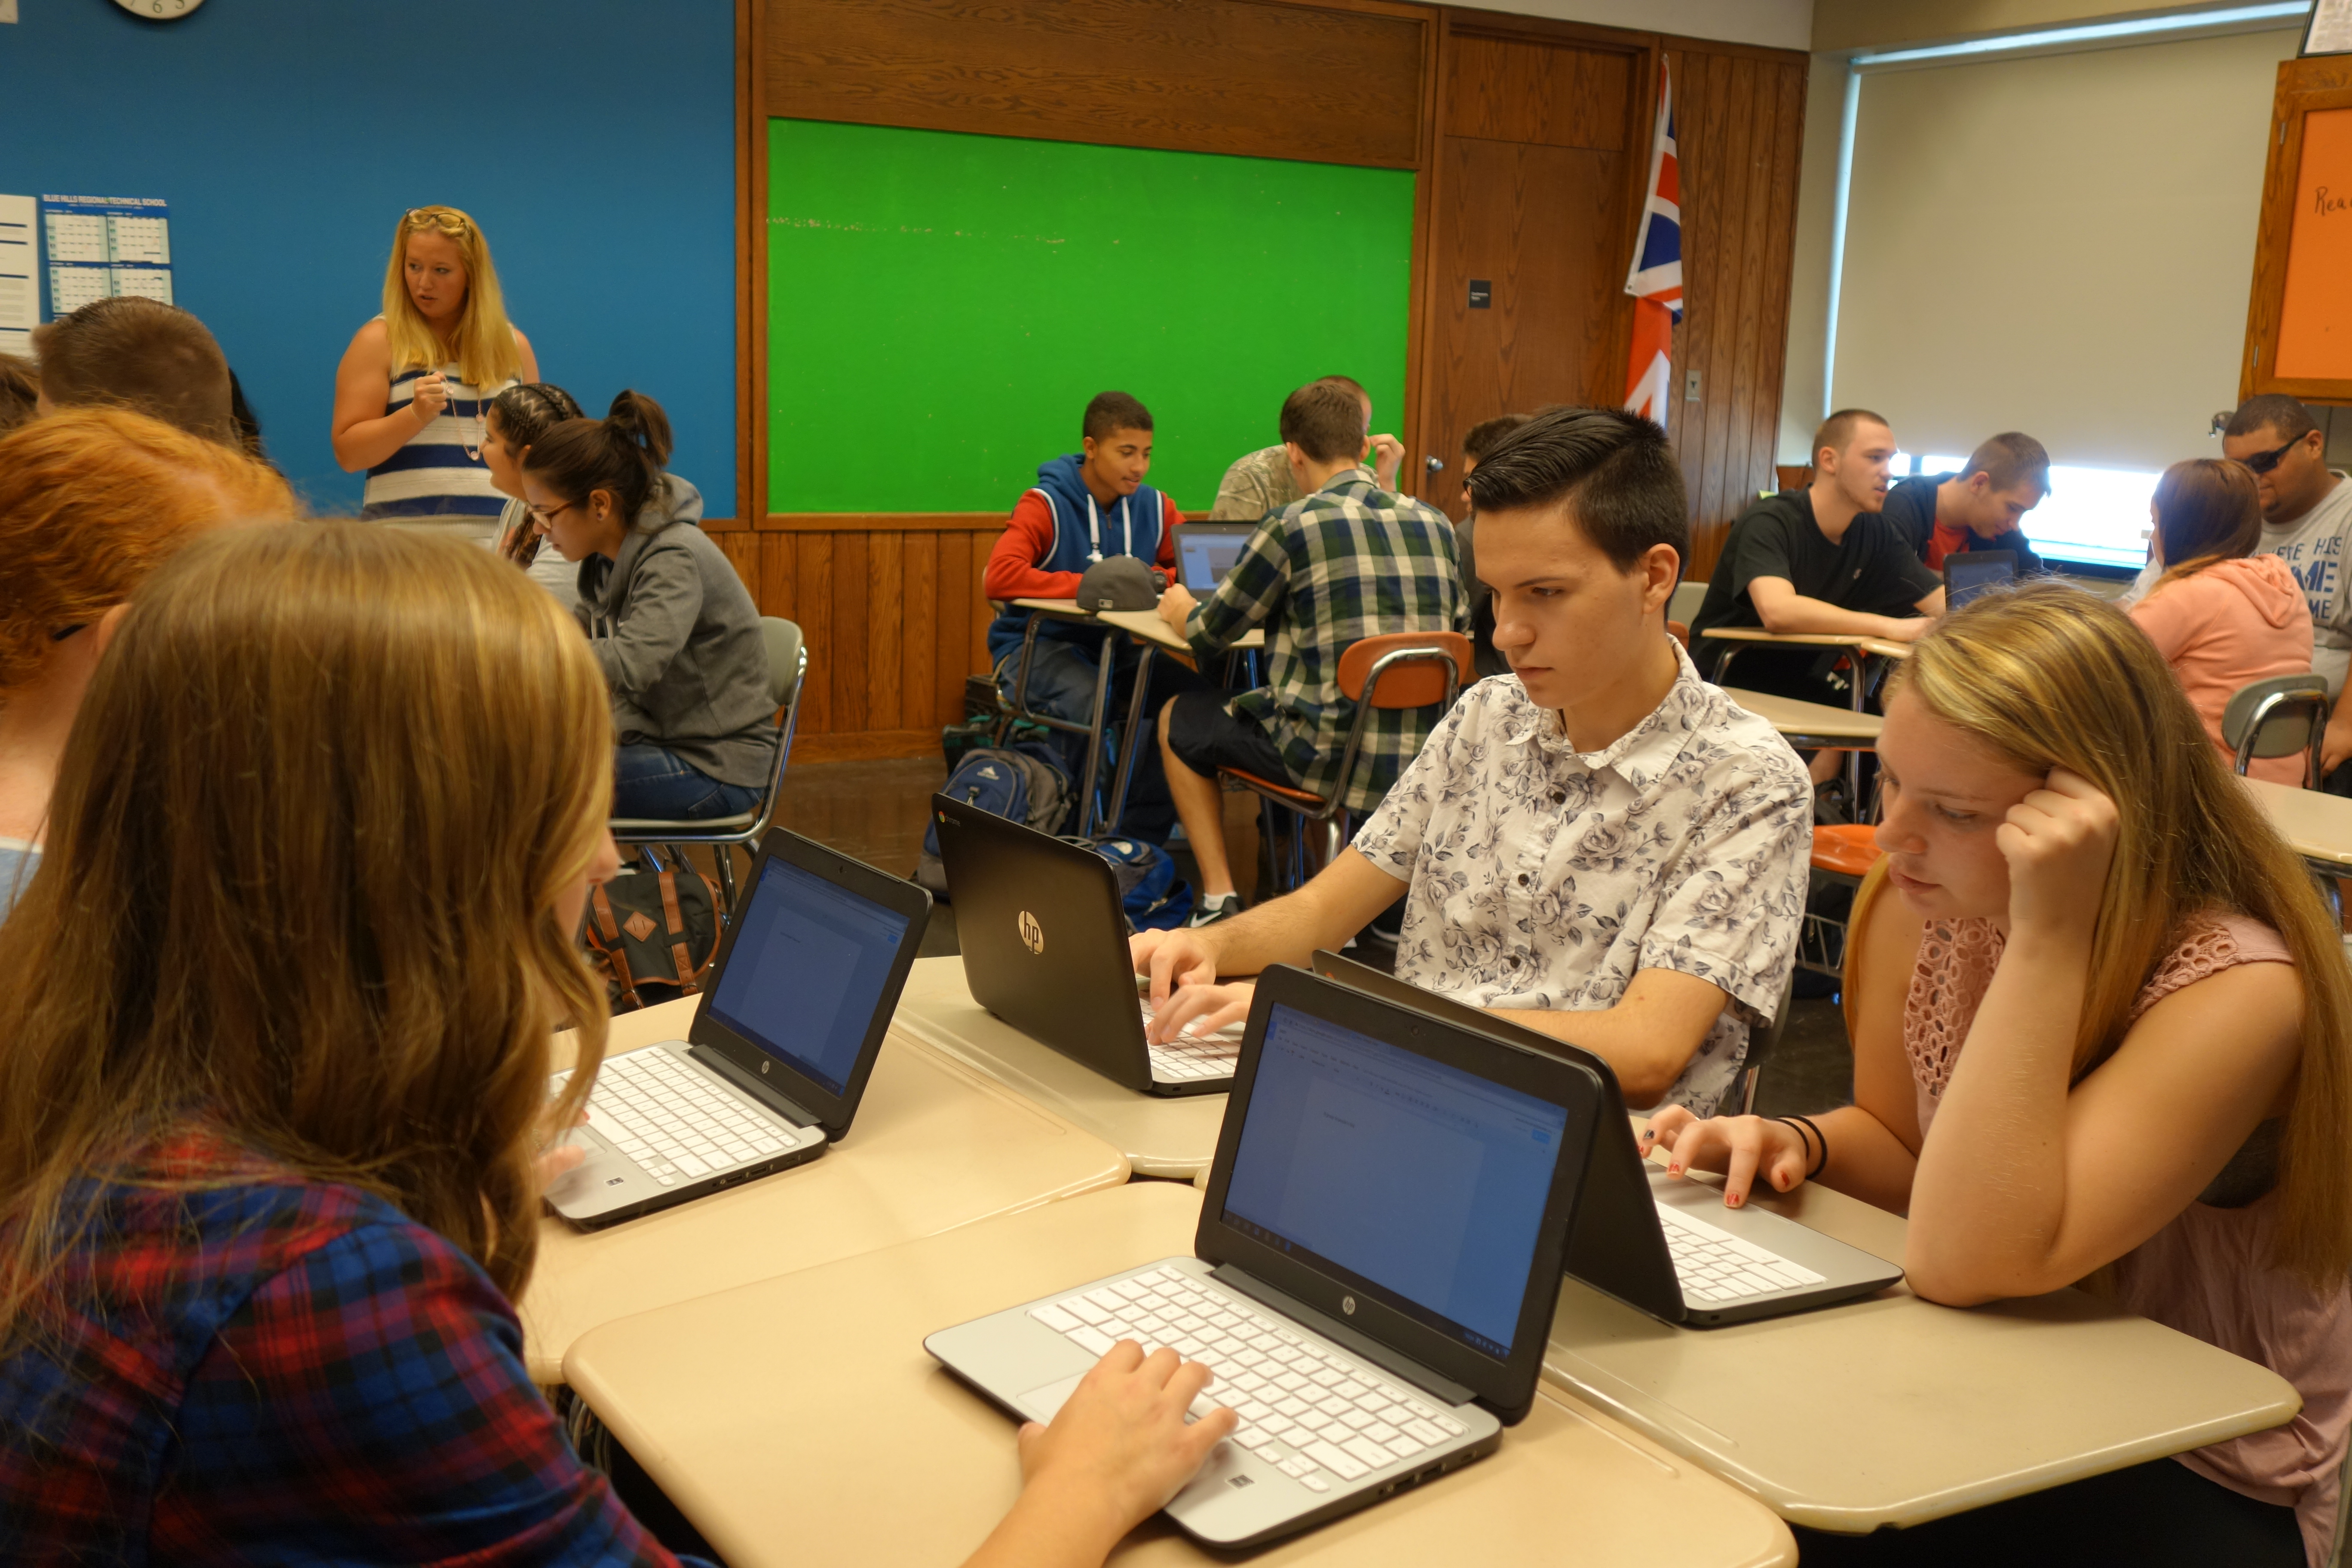 Students using Chromebooks in the classroom